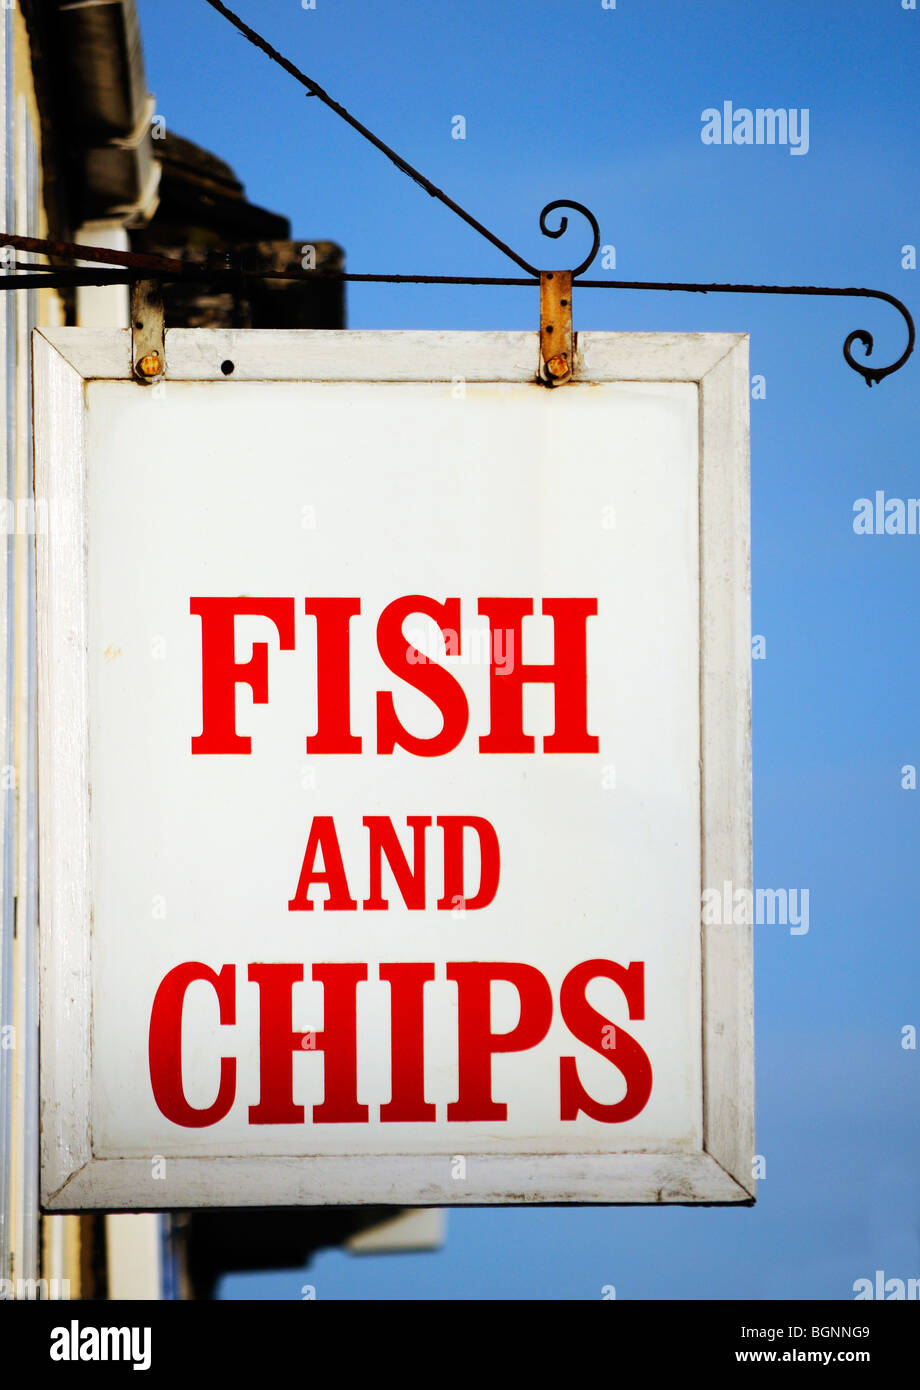 a fish and chips sign in halifax, yorkshire, england Stock Photo